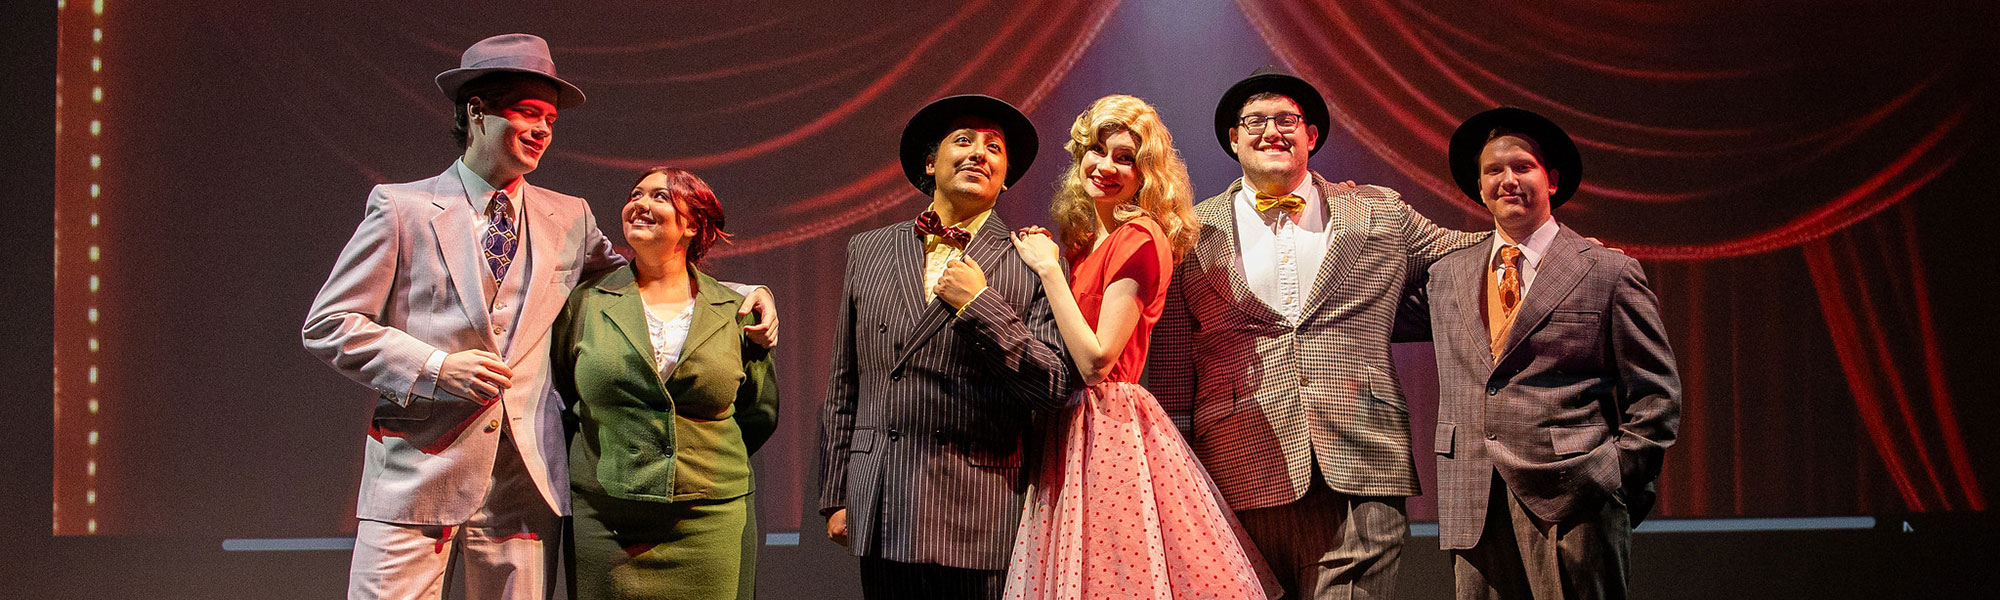 Cast of Guys and Dolls theatre production